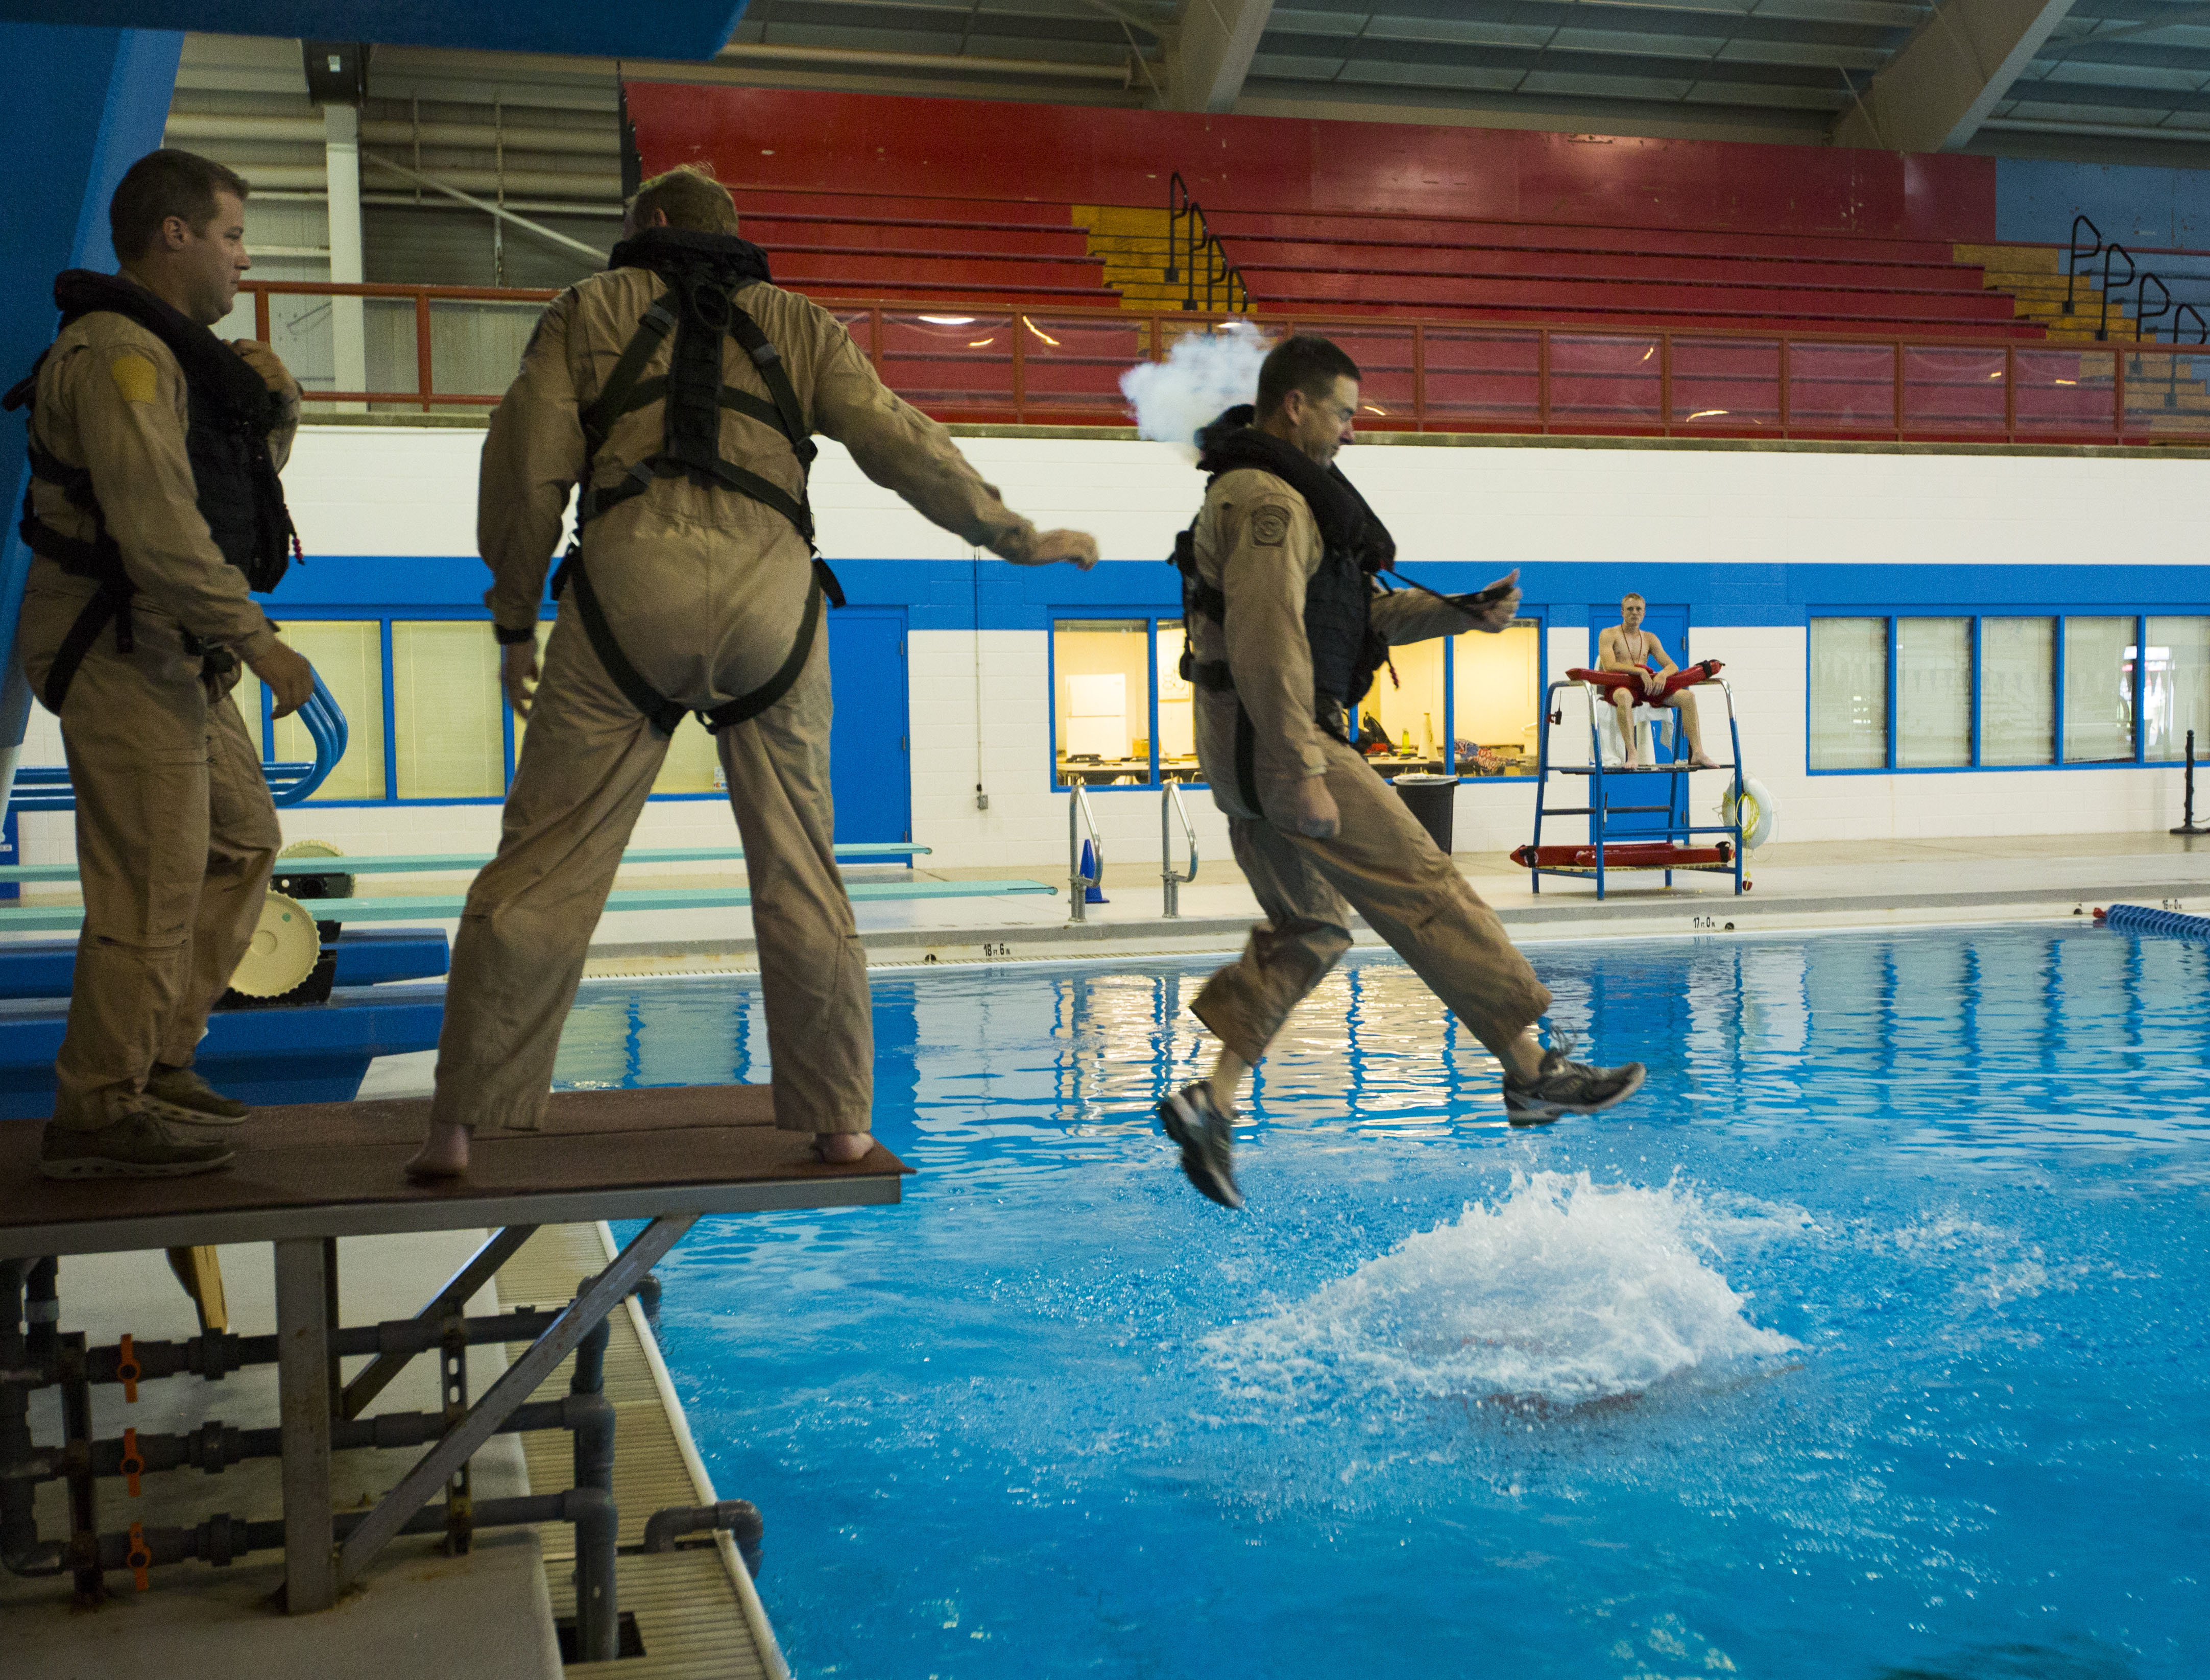 A diving platform is used to simulate an aircraft evacuation.